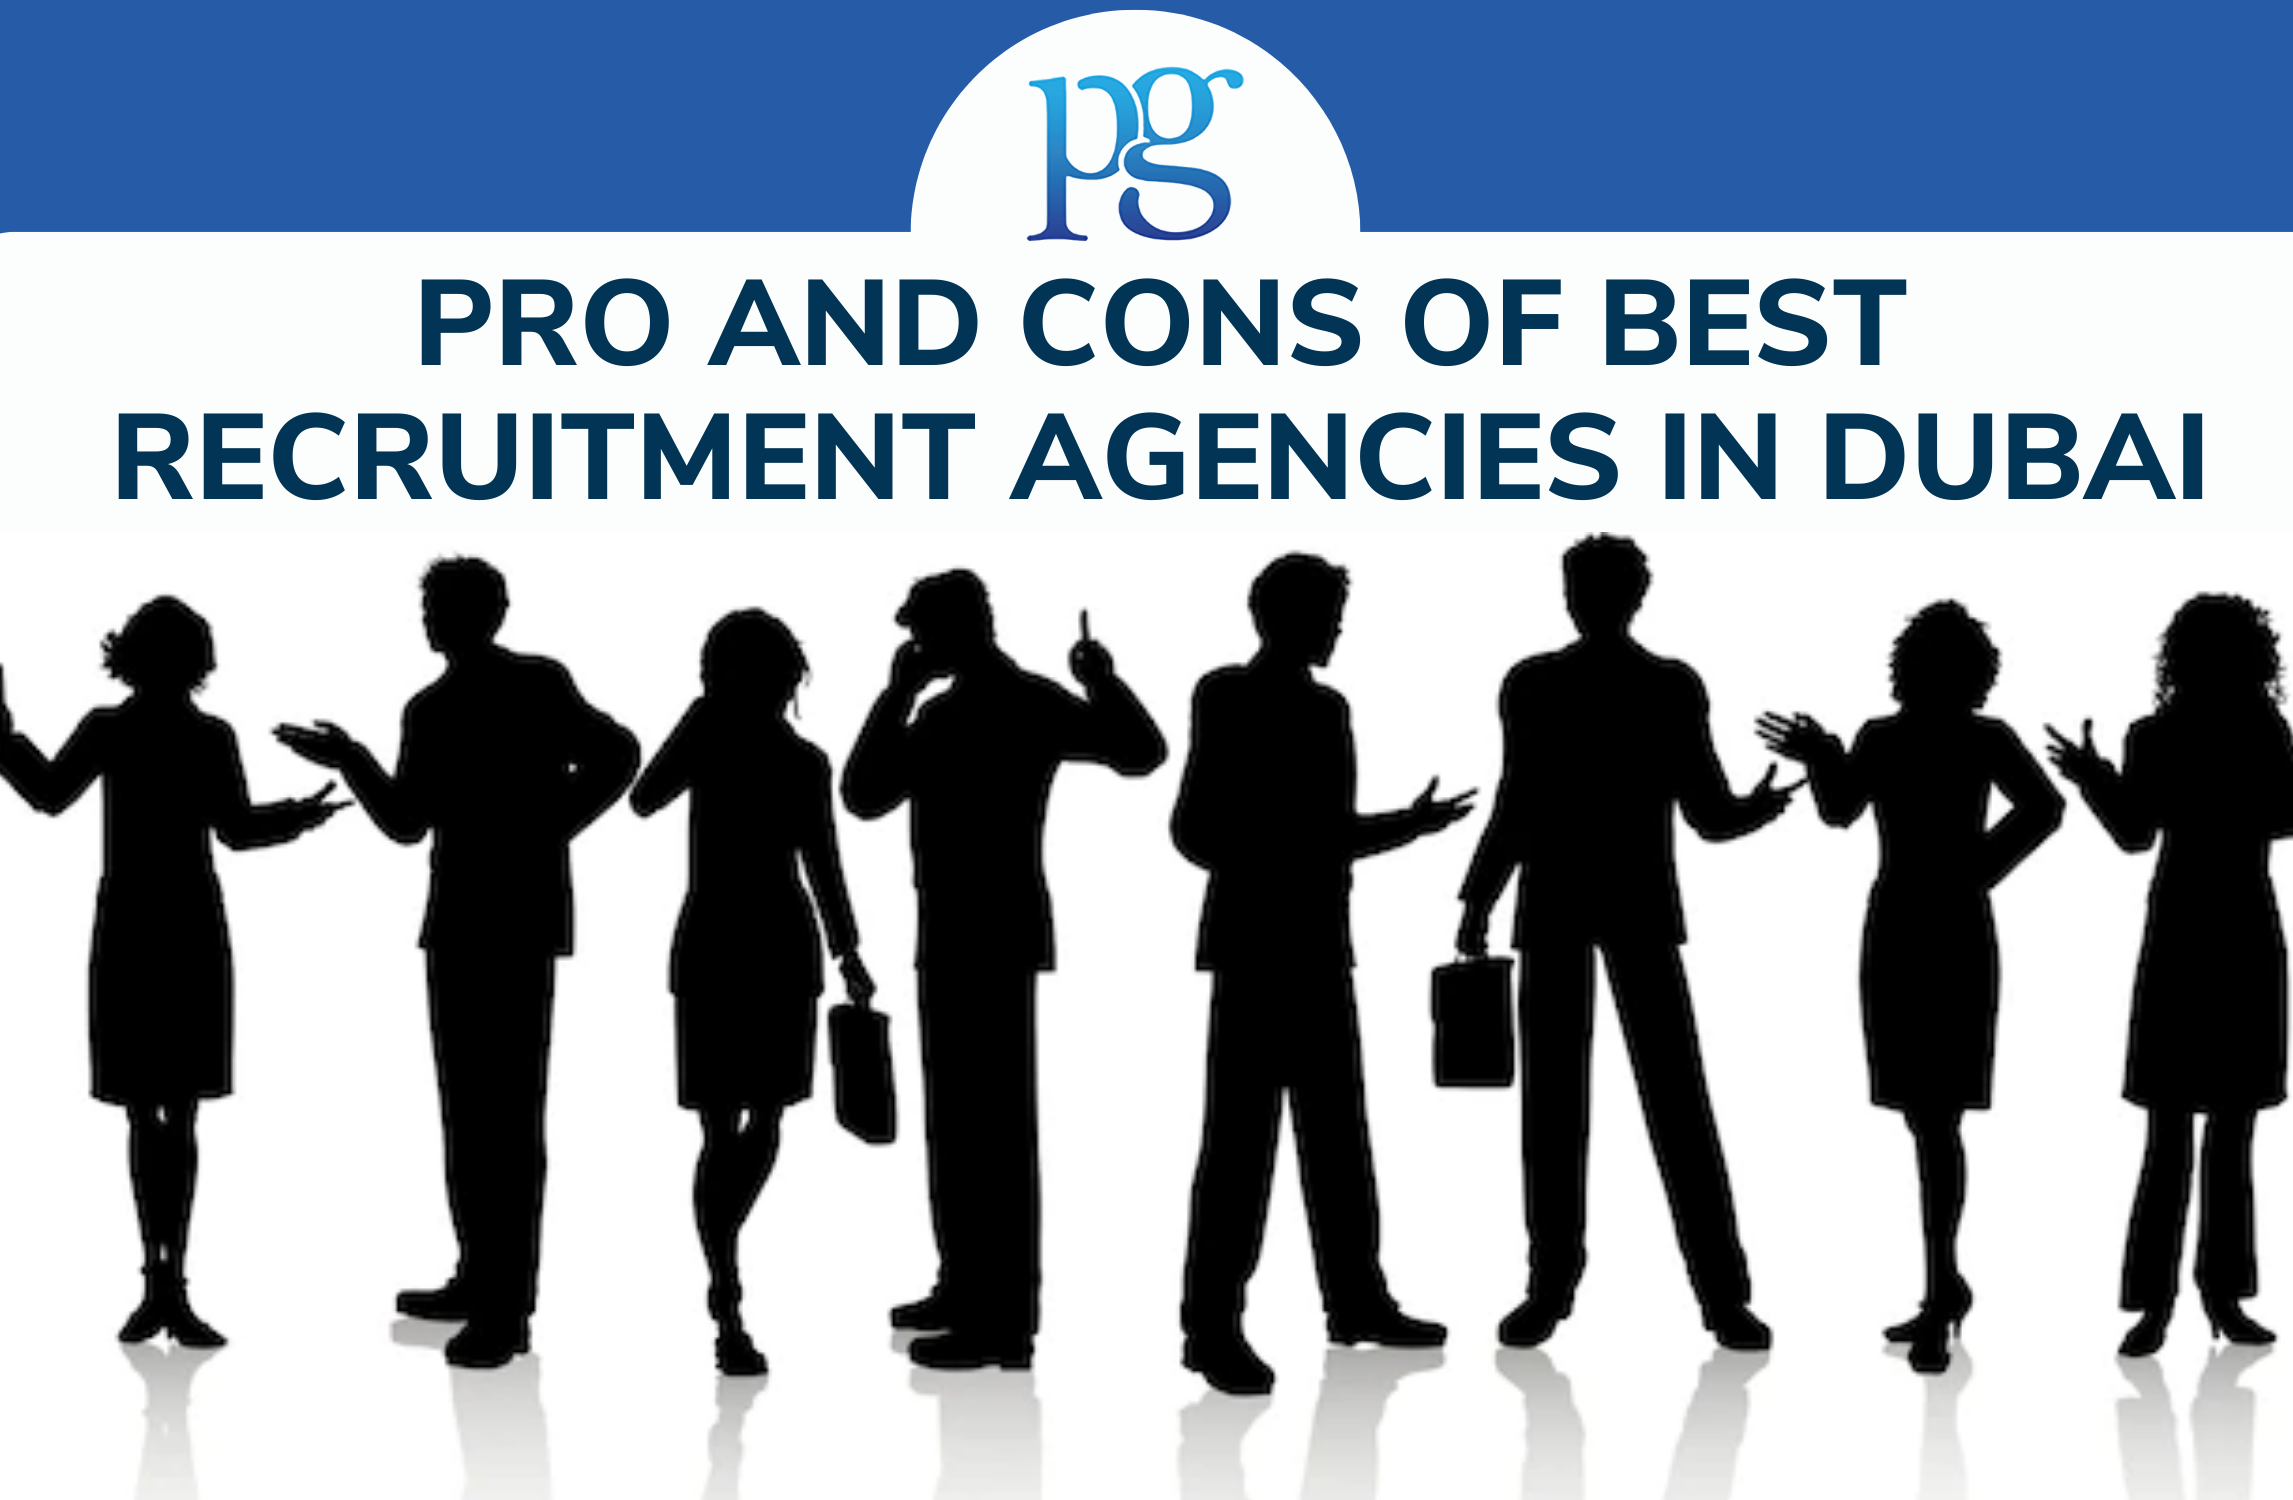 Pro And Cons Of Best Recruitment Agencies in Dubai